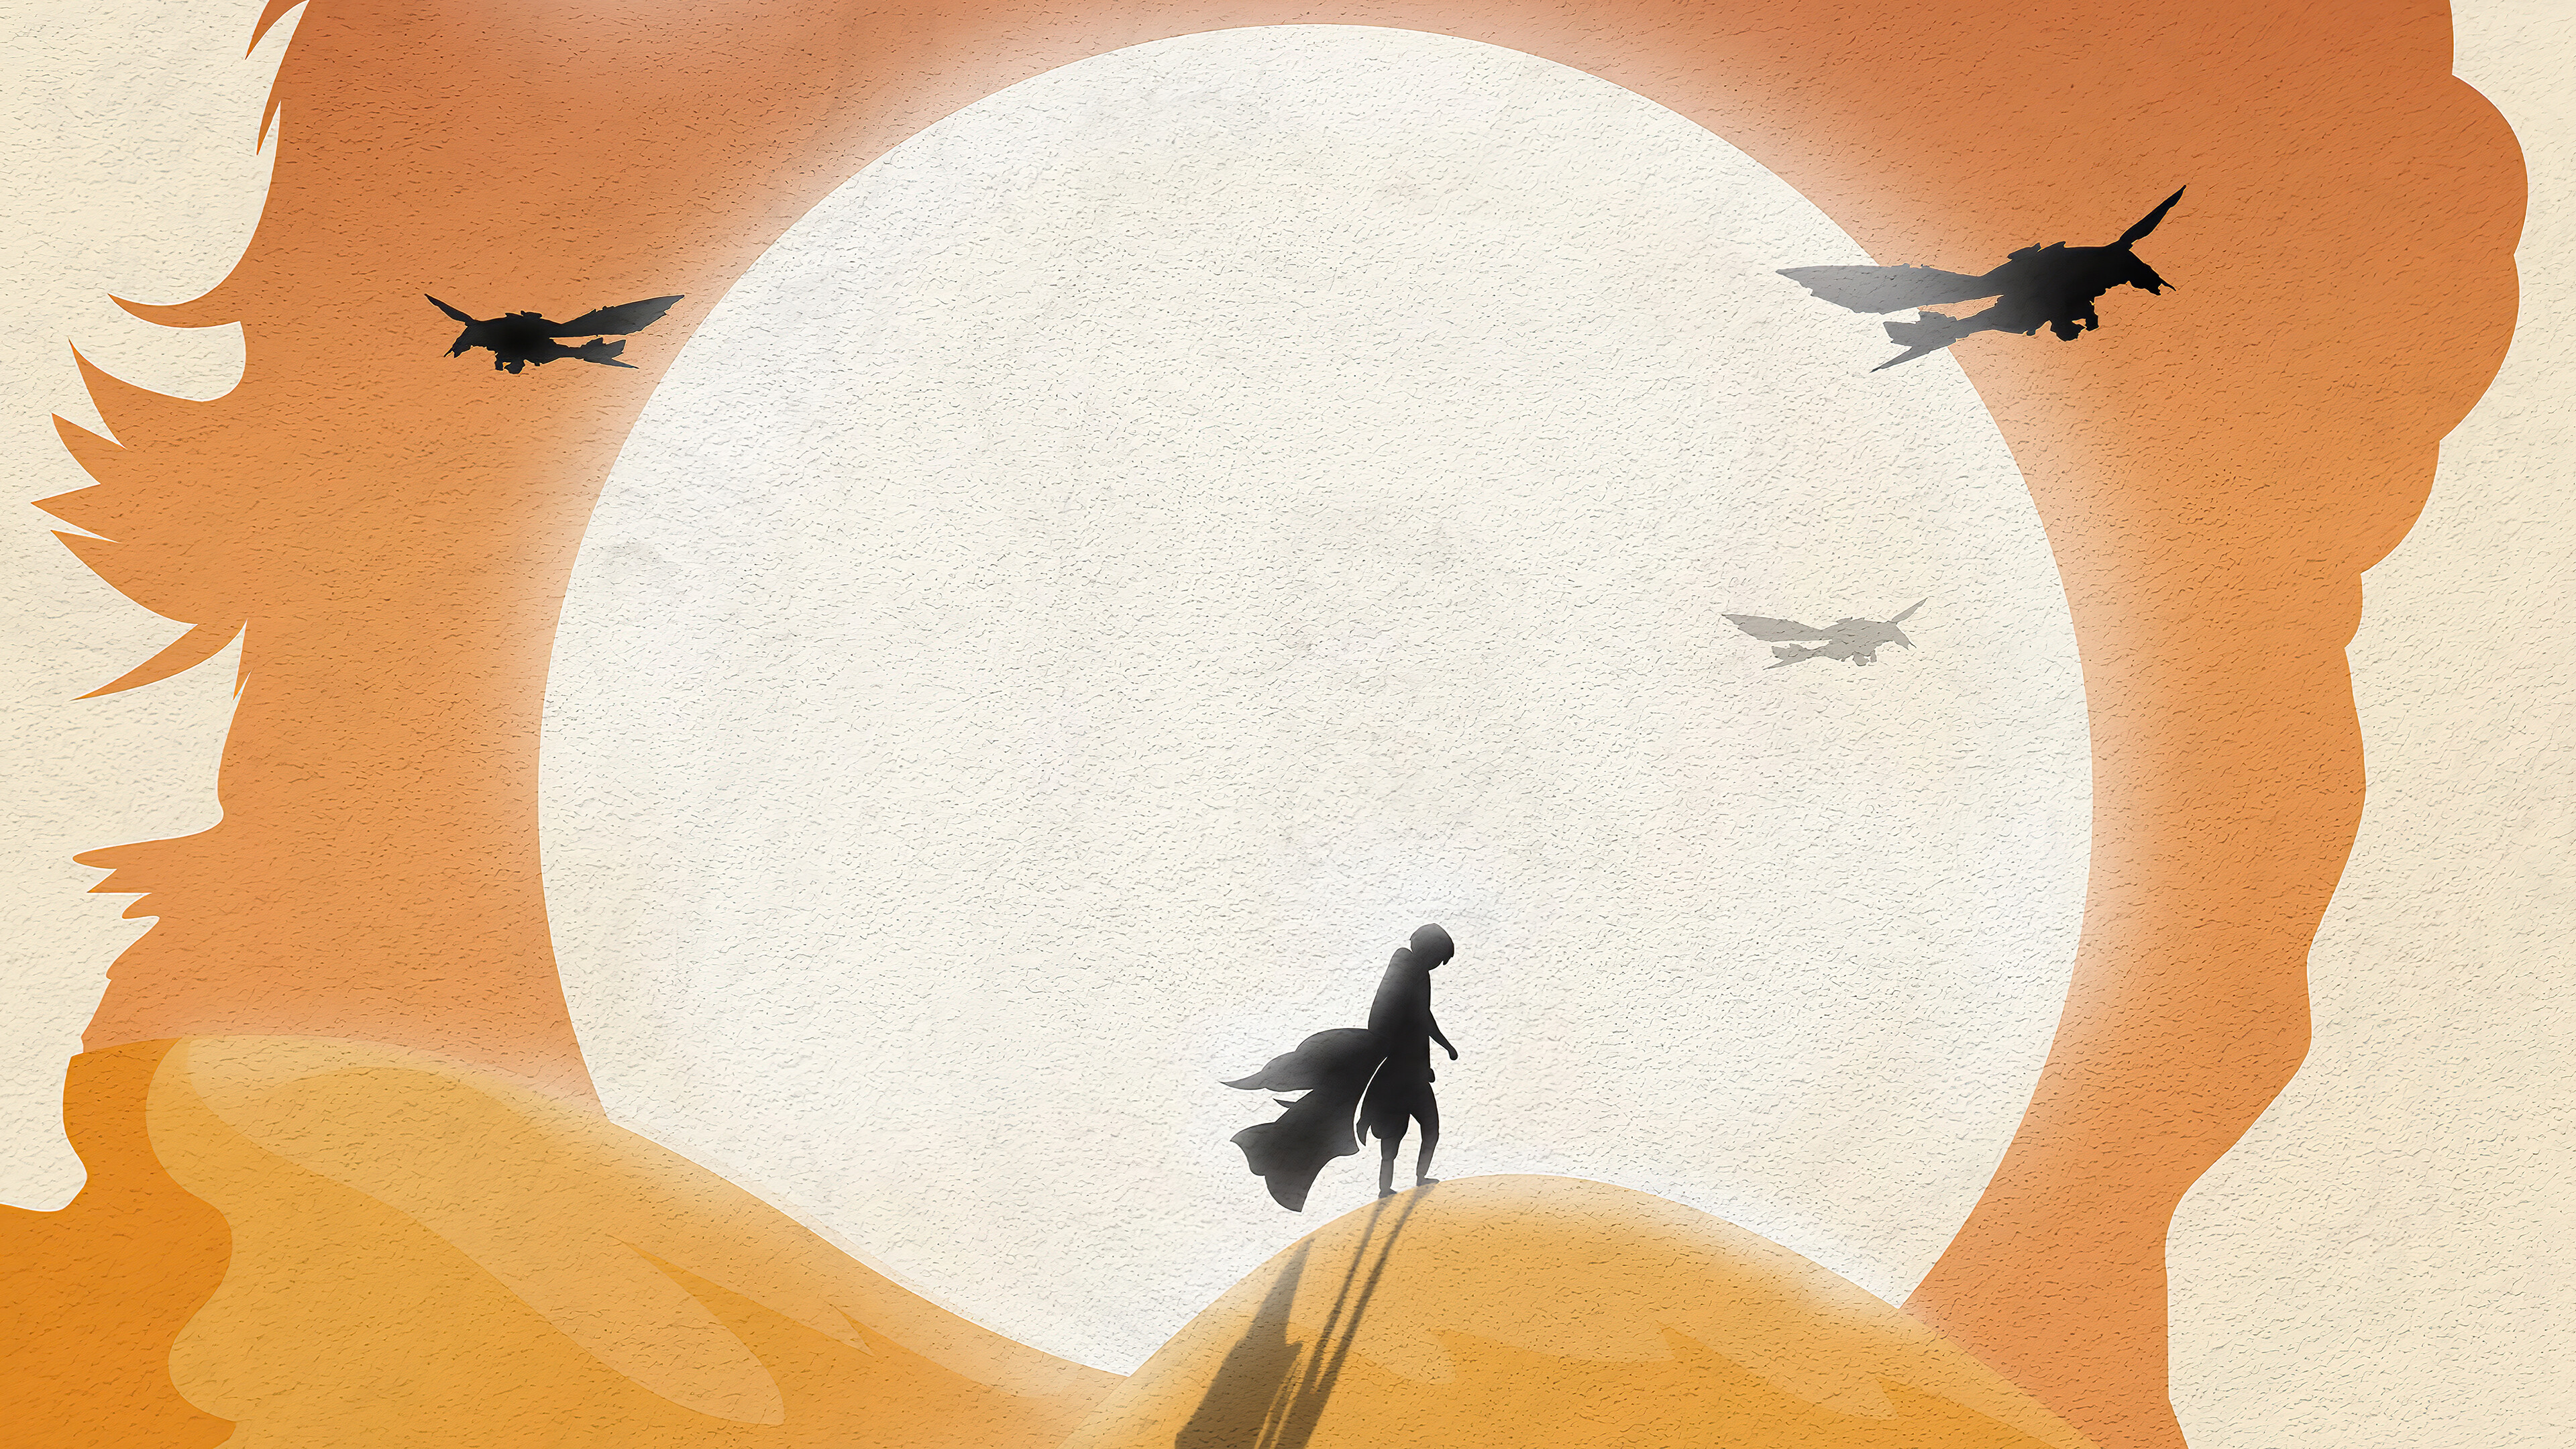 Dune: Part One: The third adaptation overall following both the David Lynch film and John Harrison's 2000 miniseries. 3840x2160 4K Wallpaper.